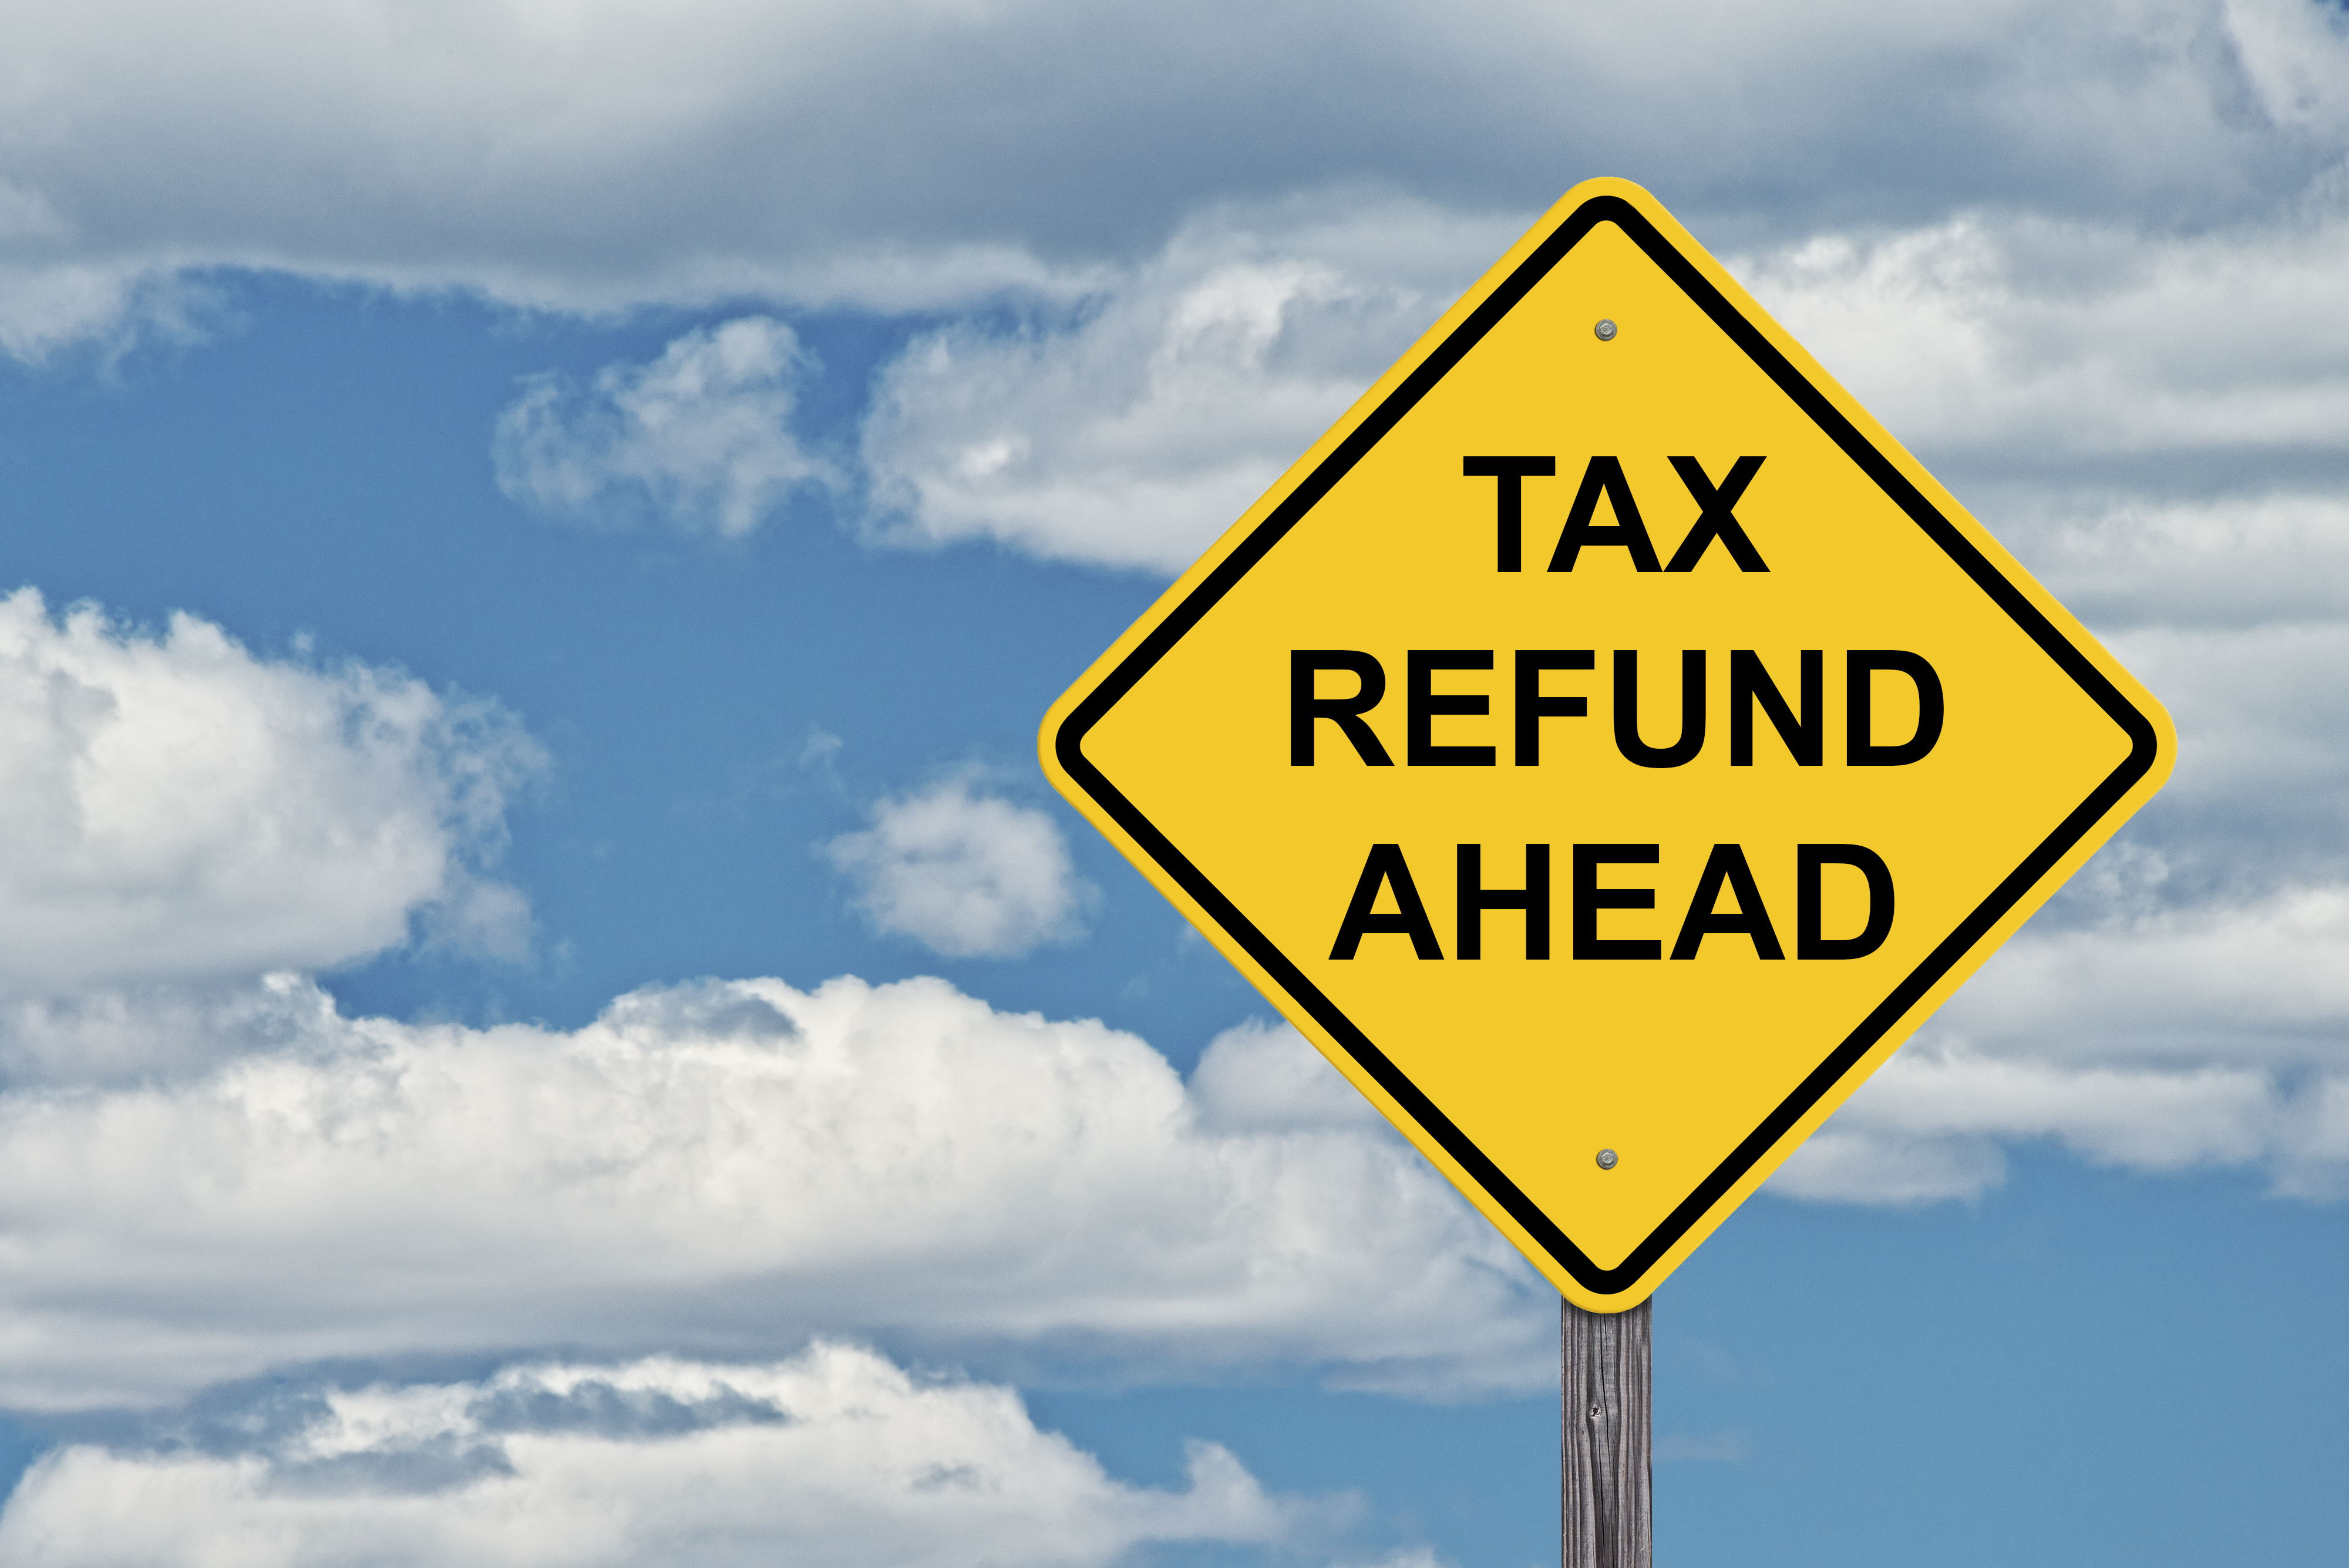 Are You Eligible For A City Tax Refund?